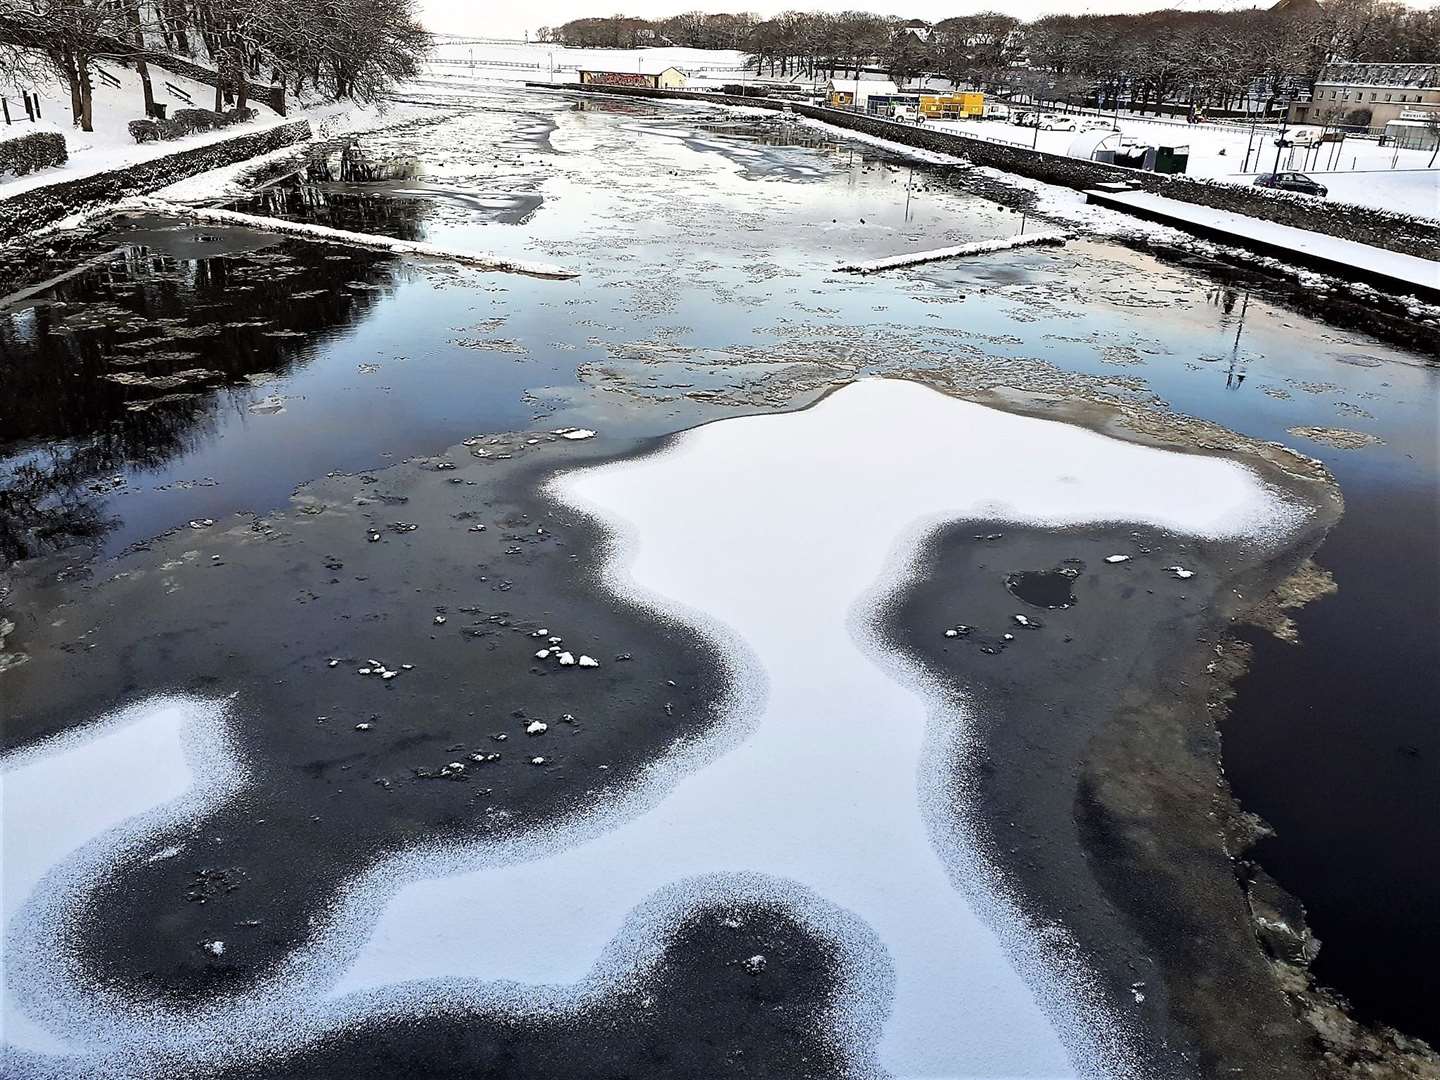 The strange shape photographed at Wick river during the freezing days earlier in the week, resembled a figure. But who or what? Picture: Derek Bremner